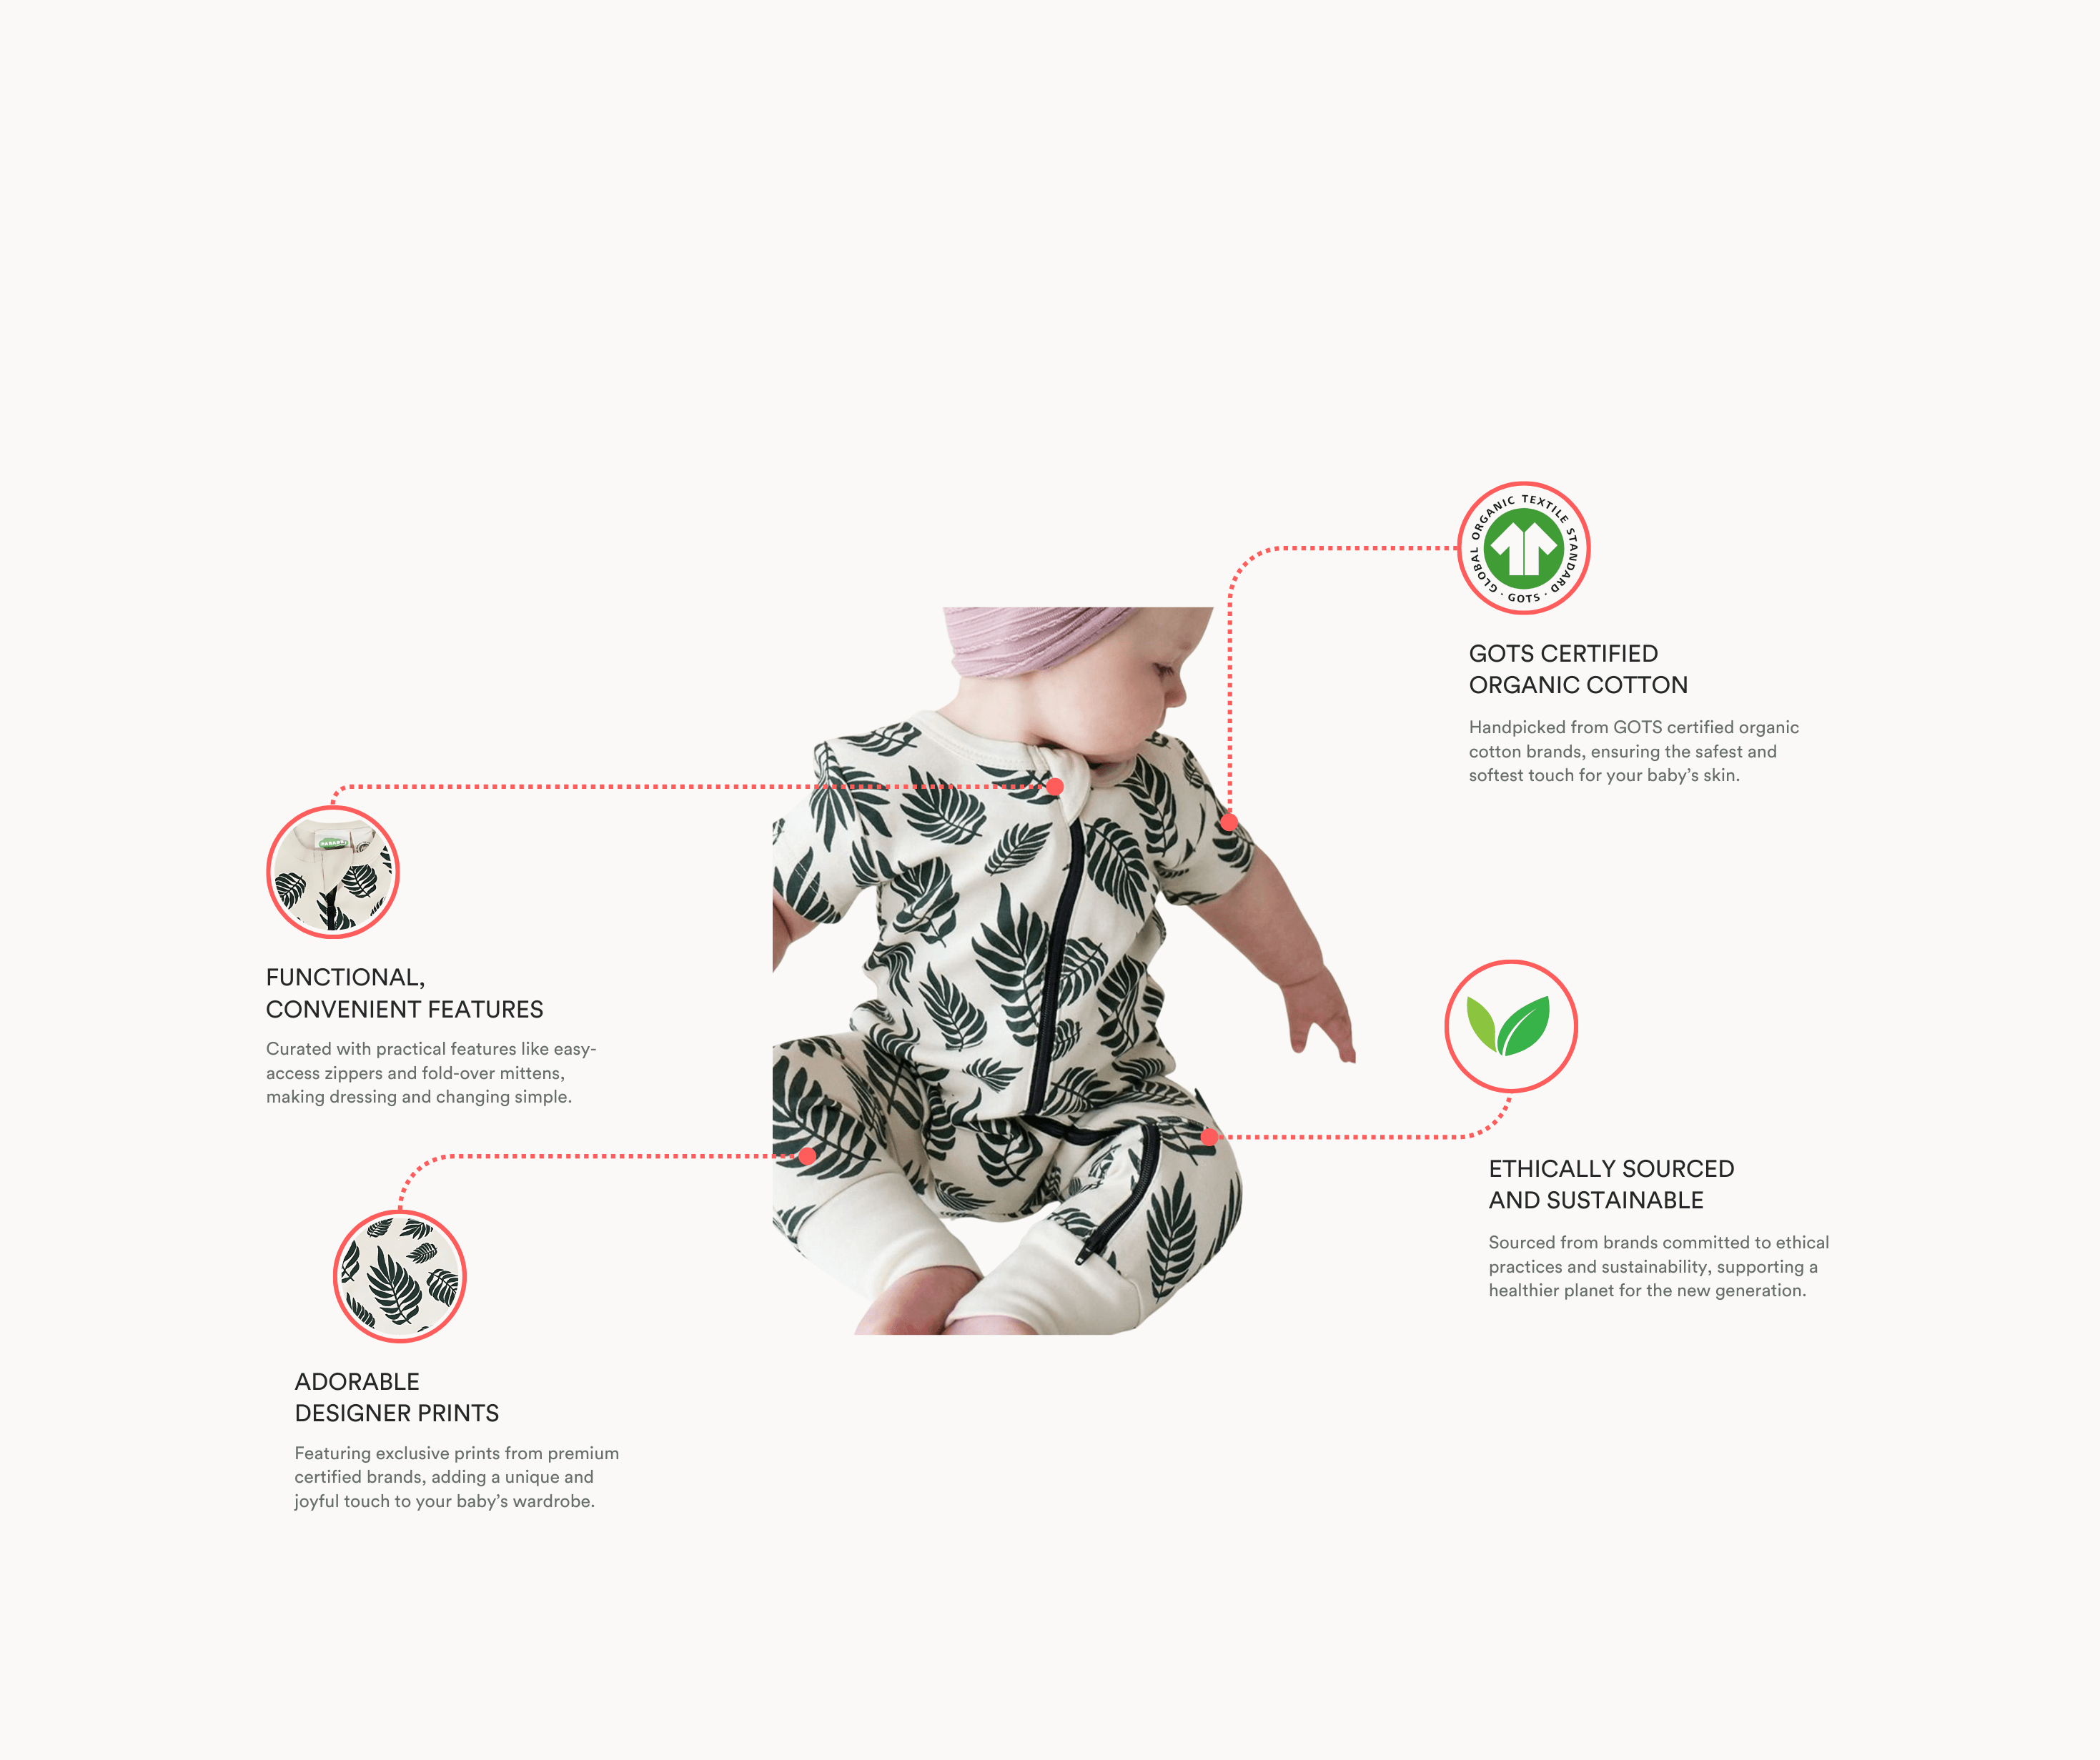 The Best Fabrics for Your Baby's Skin